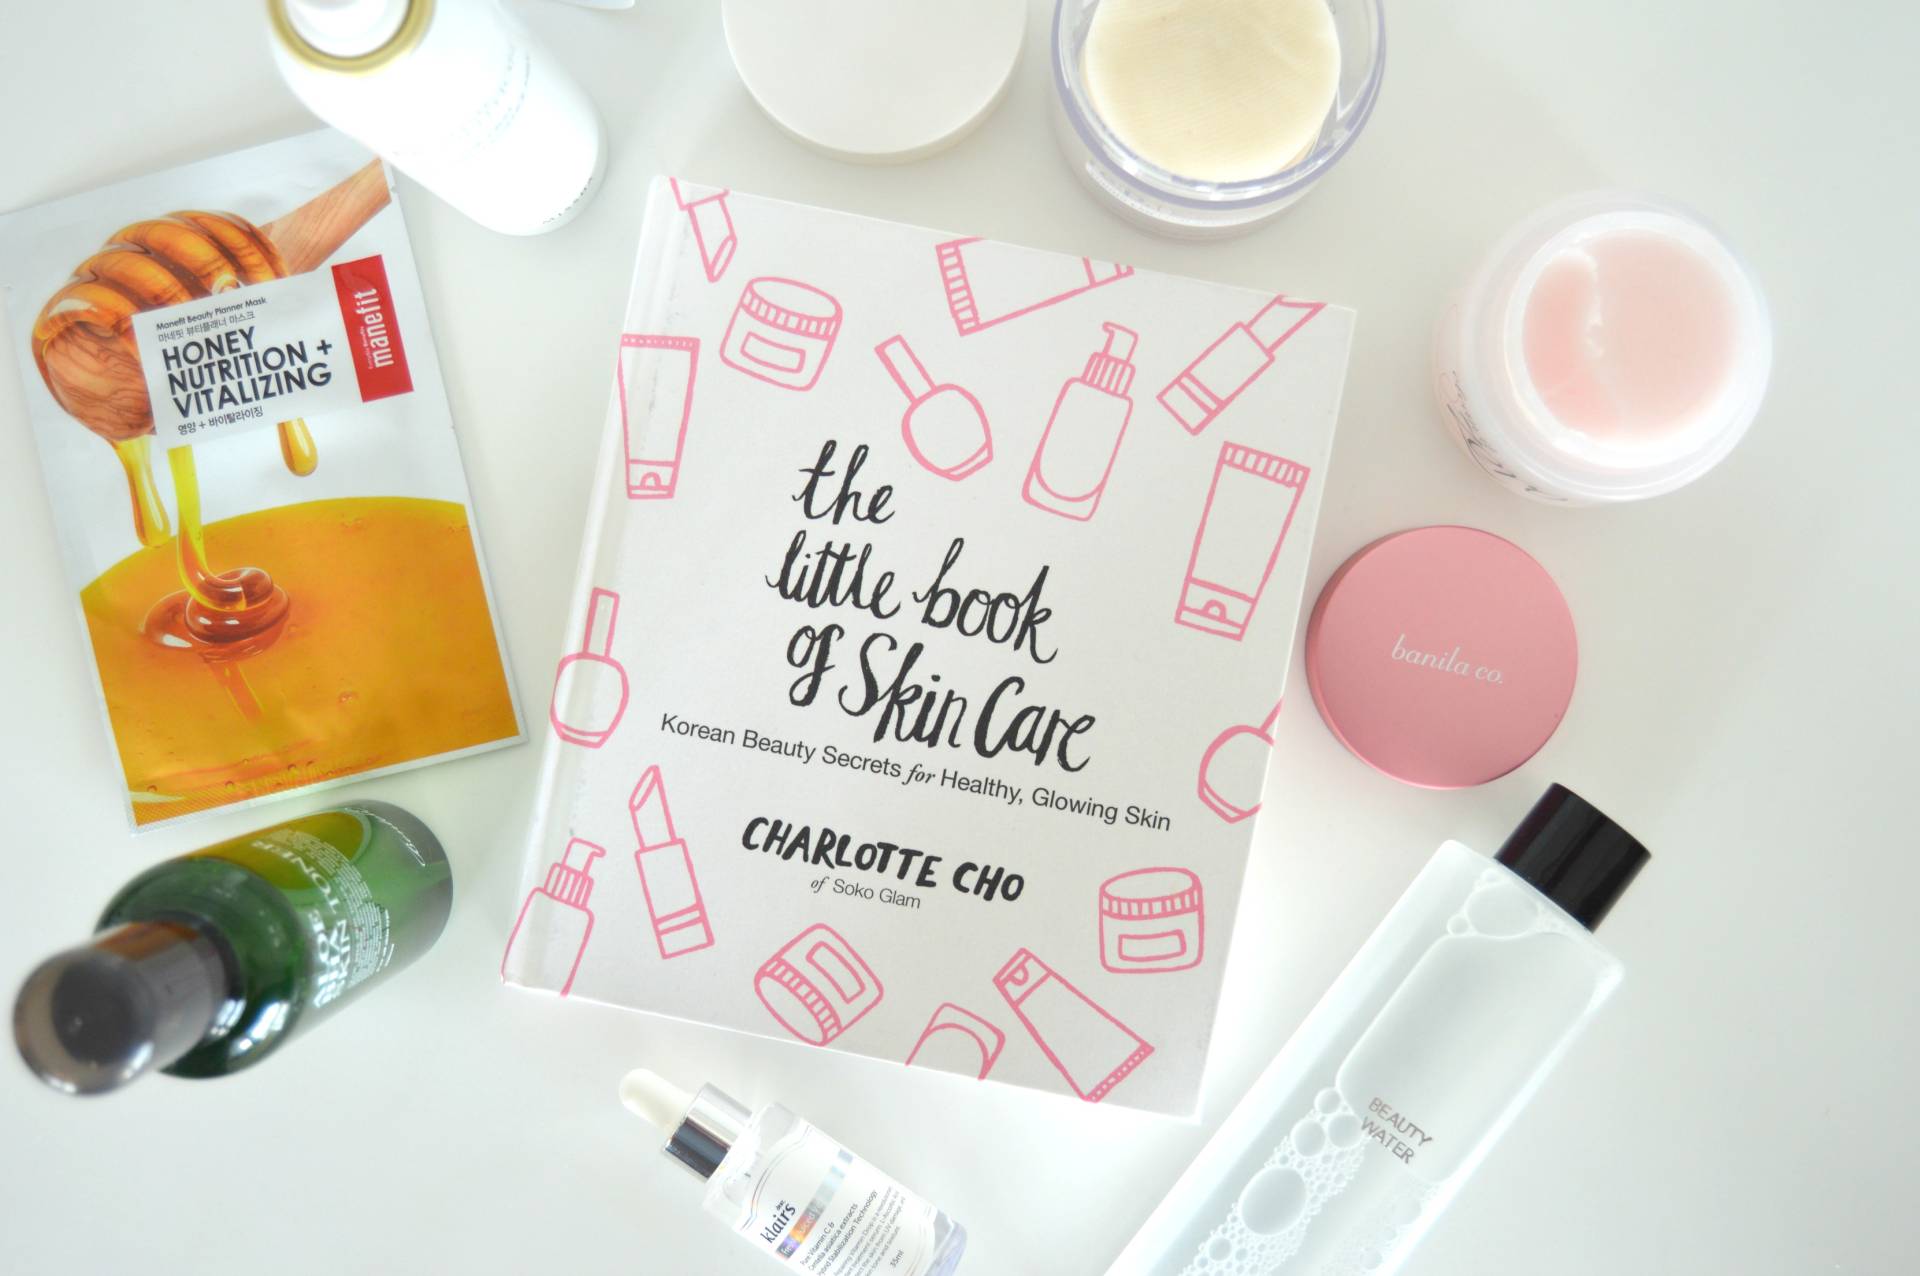 'The Little Book of Skincare' + Soko Glam = kbeauty